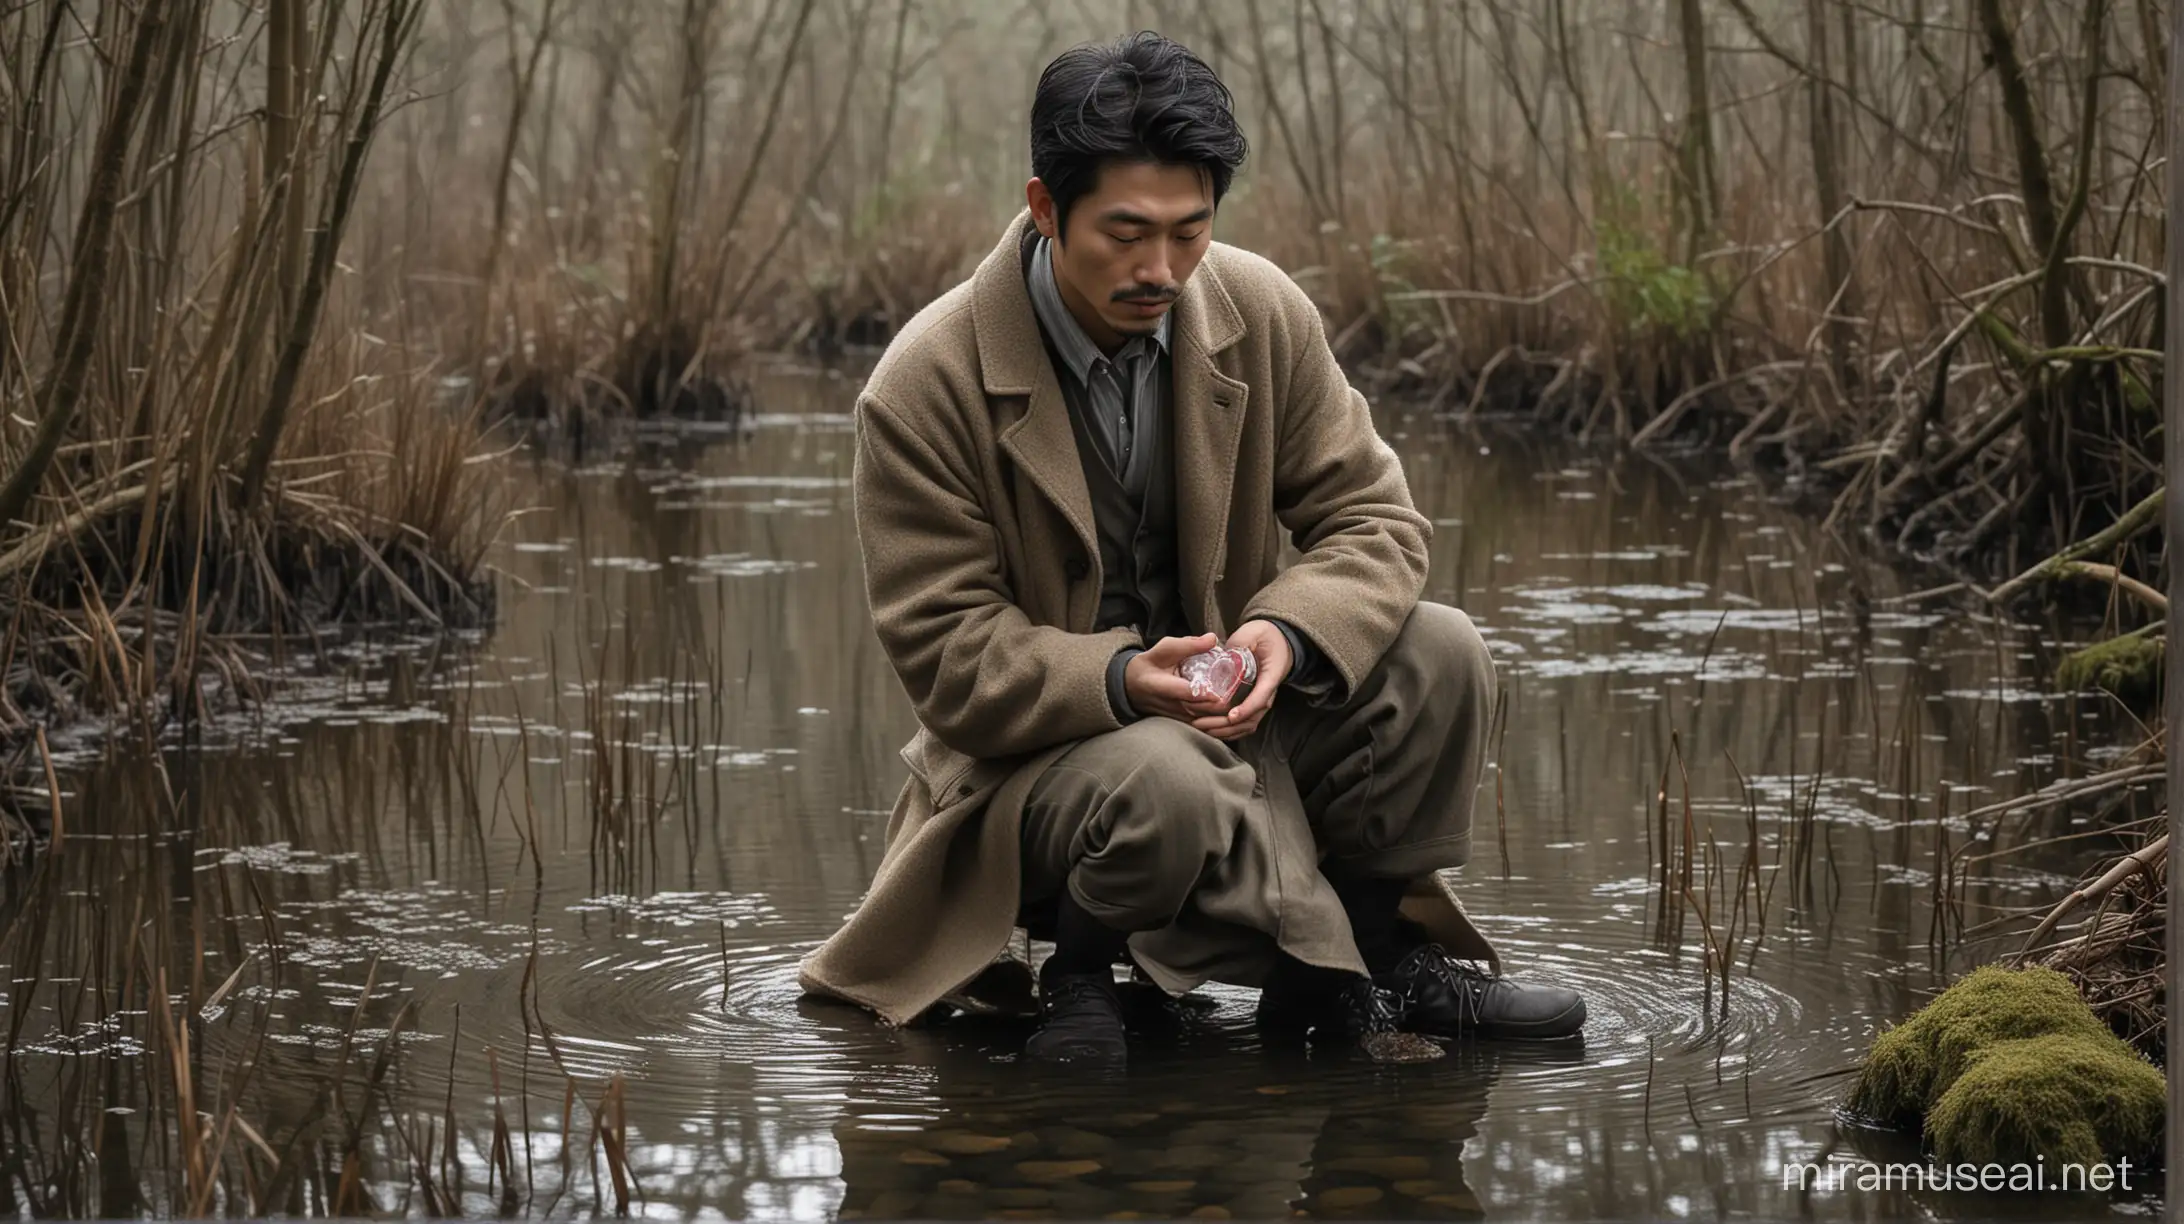 in the style of a French graphic novel, a Japanese man in a woollen coat, stands knee deep in a swamp, holding a transparent glass anatomically correct heart in his hand